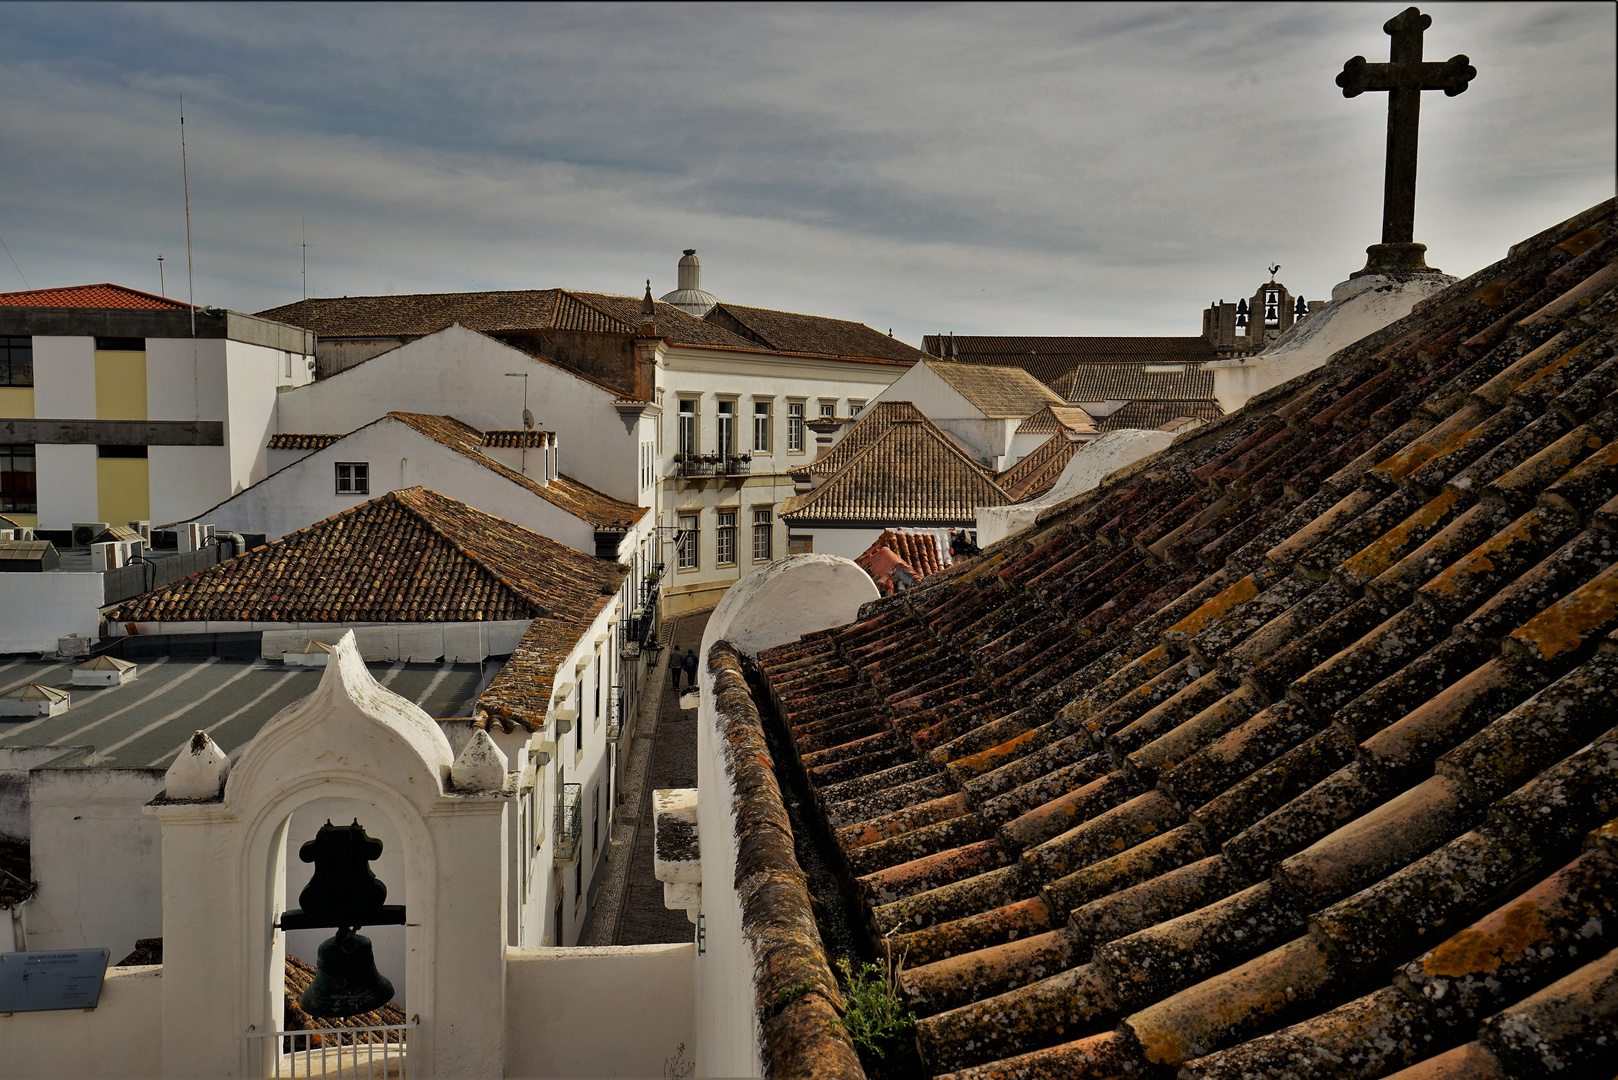 Roofs of Faro